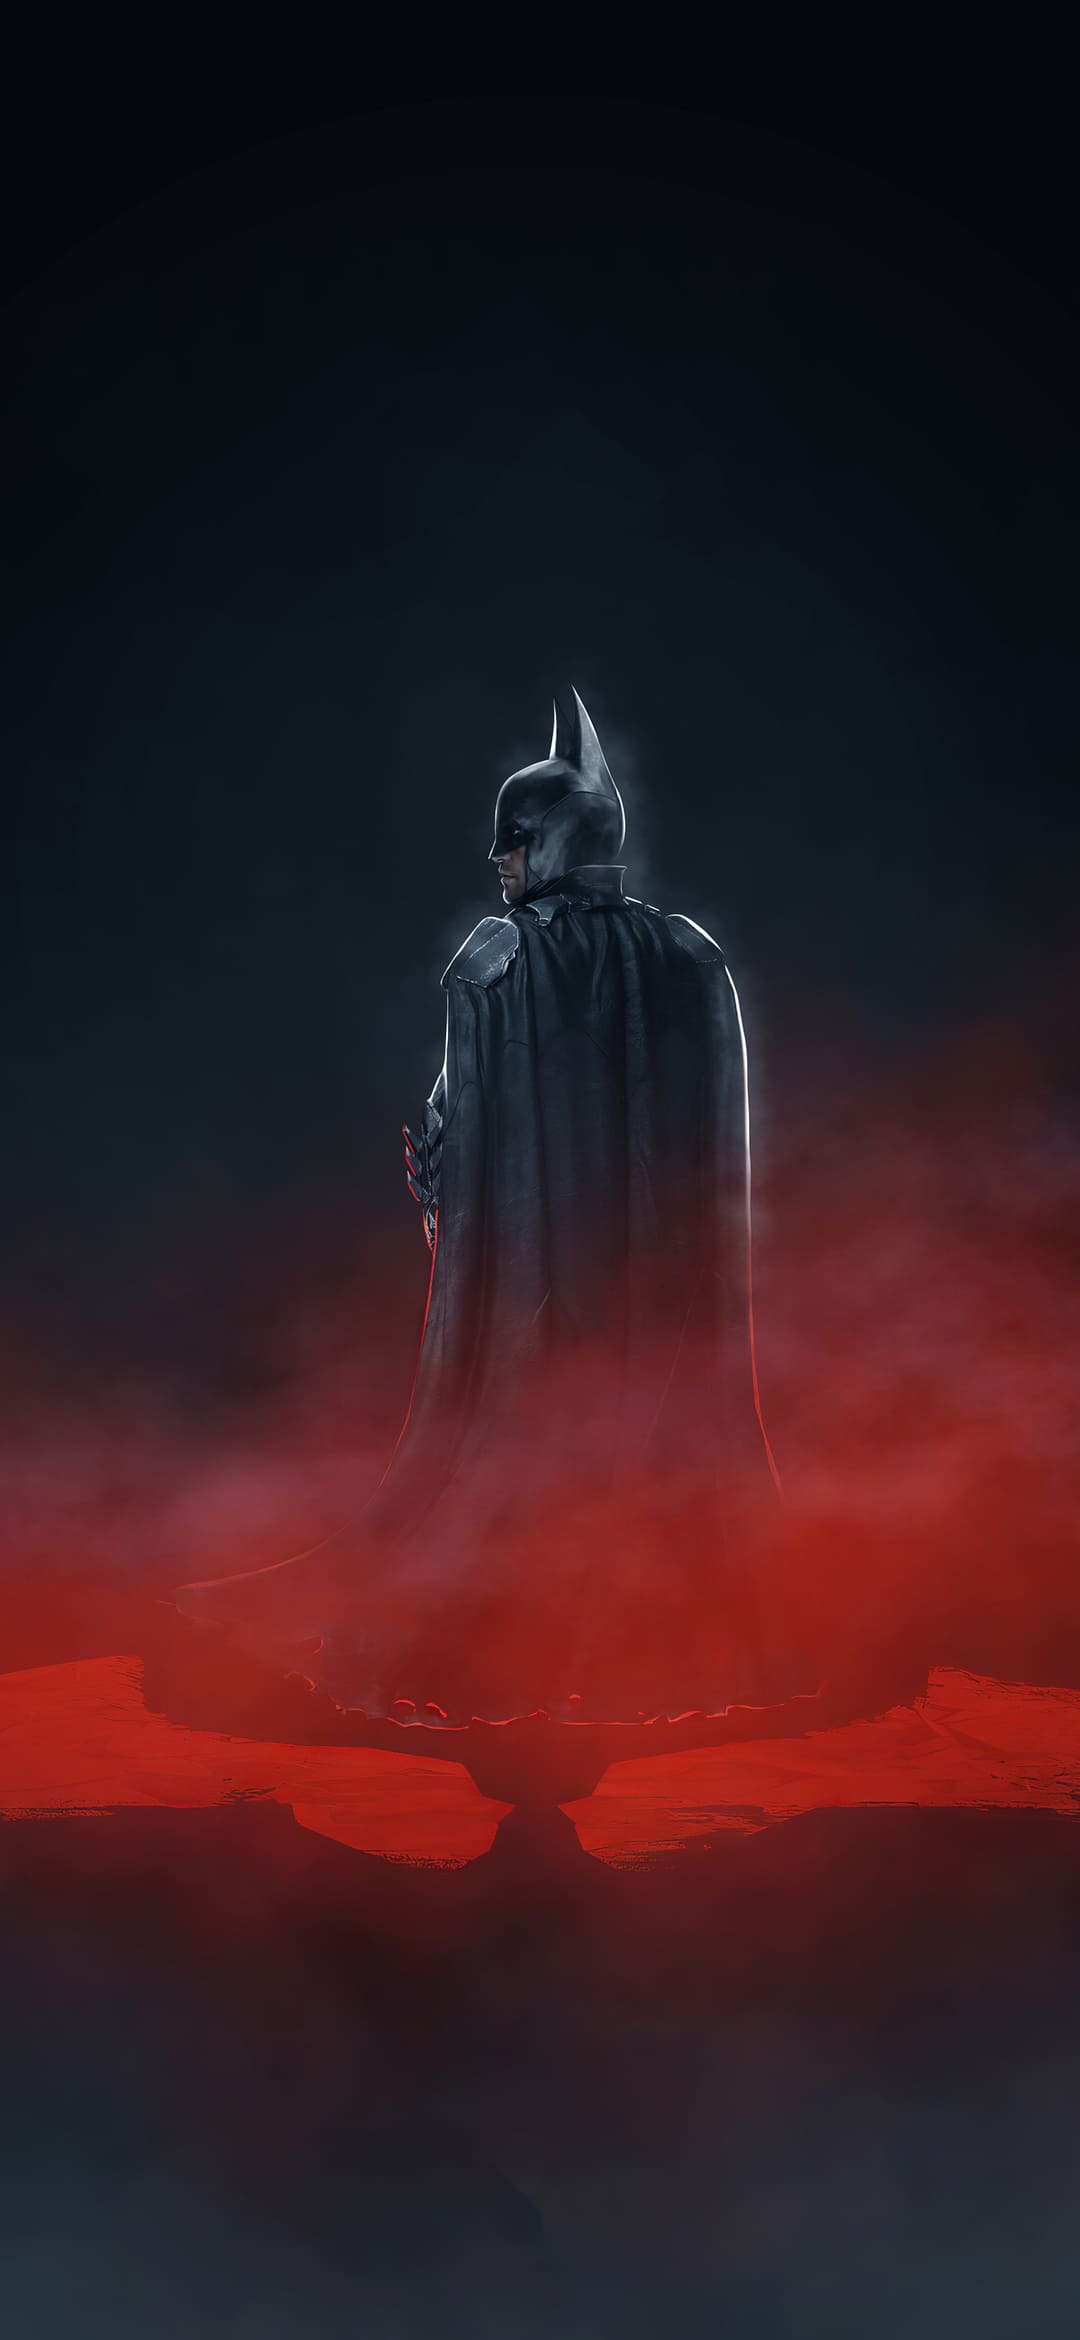 Free download The Batman 2021 iPhone Wallpaper [1080x2340] for your Desktop, Mobile & Tablet. Explore iPhone 2021 Wallpaper. Marvel's Avengers Game 2021 Wallpaper, 2021 Acura TLX Type S Wallpaper, iPhone Wallpaper iPhone 6